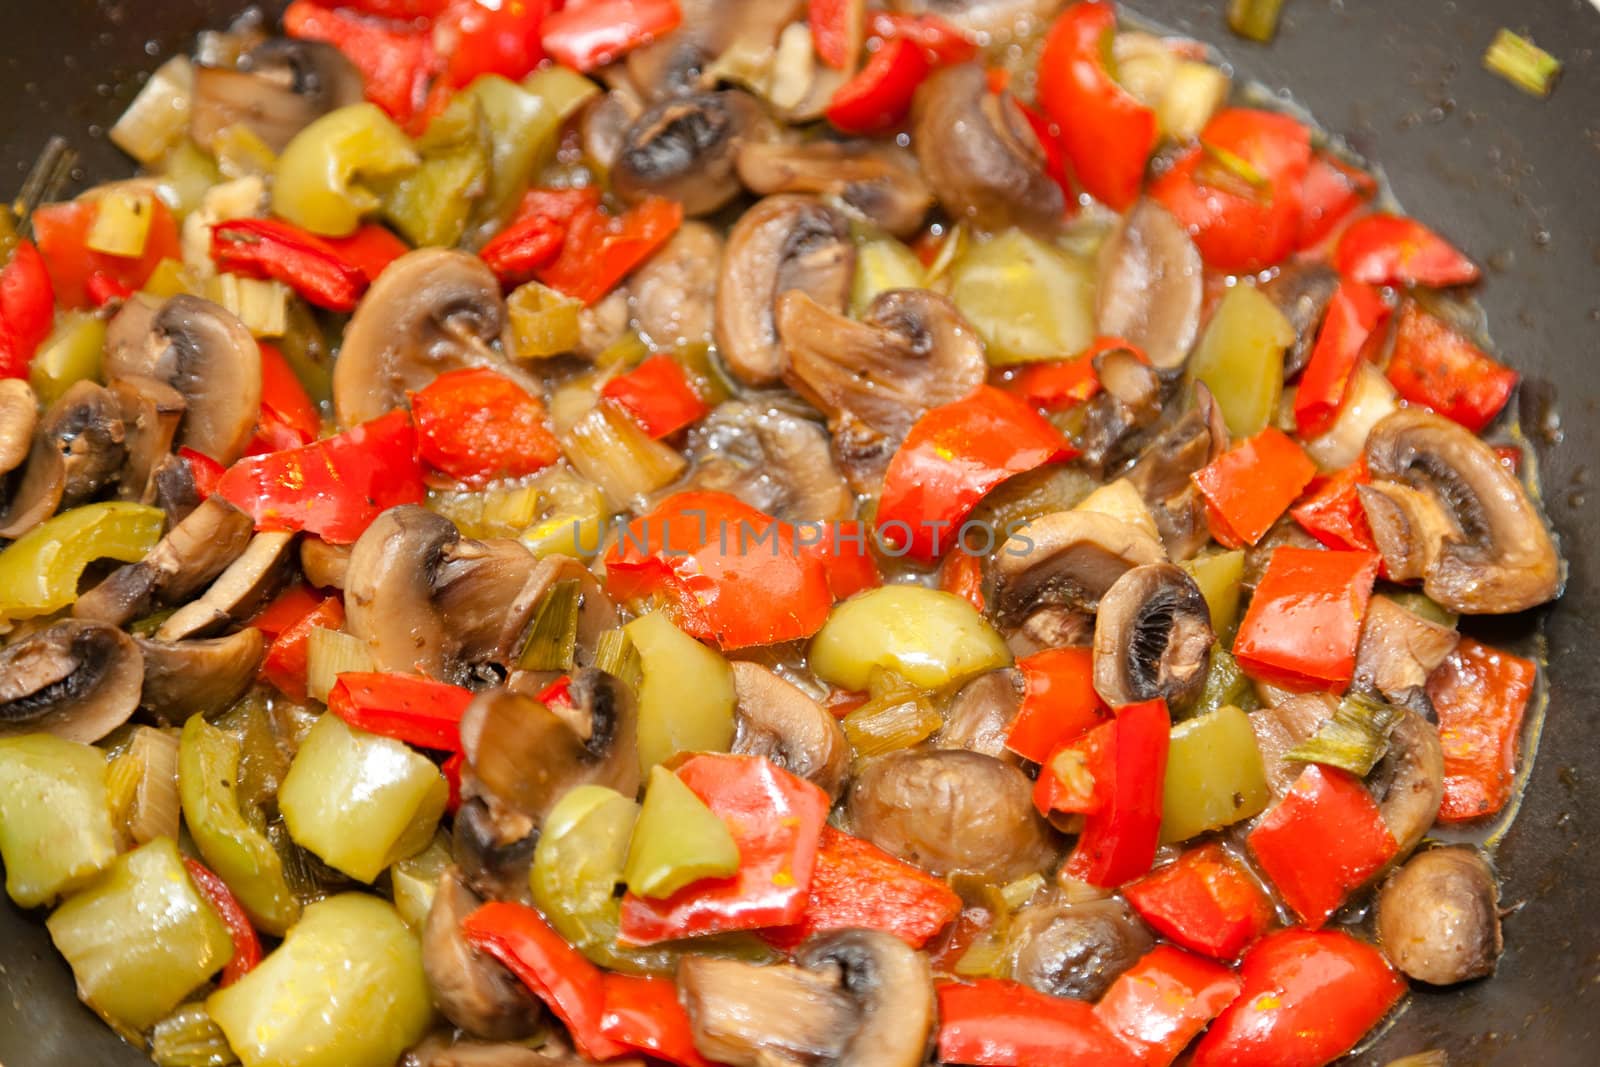 Mushrooms with bell peppers by melastmohican